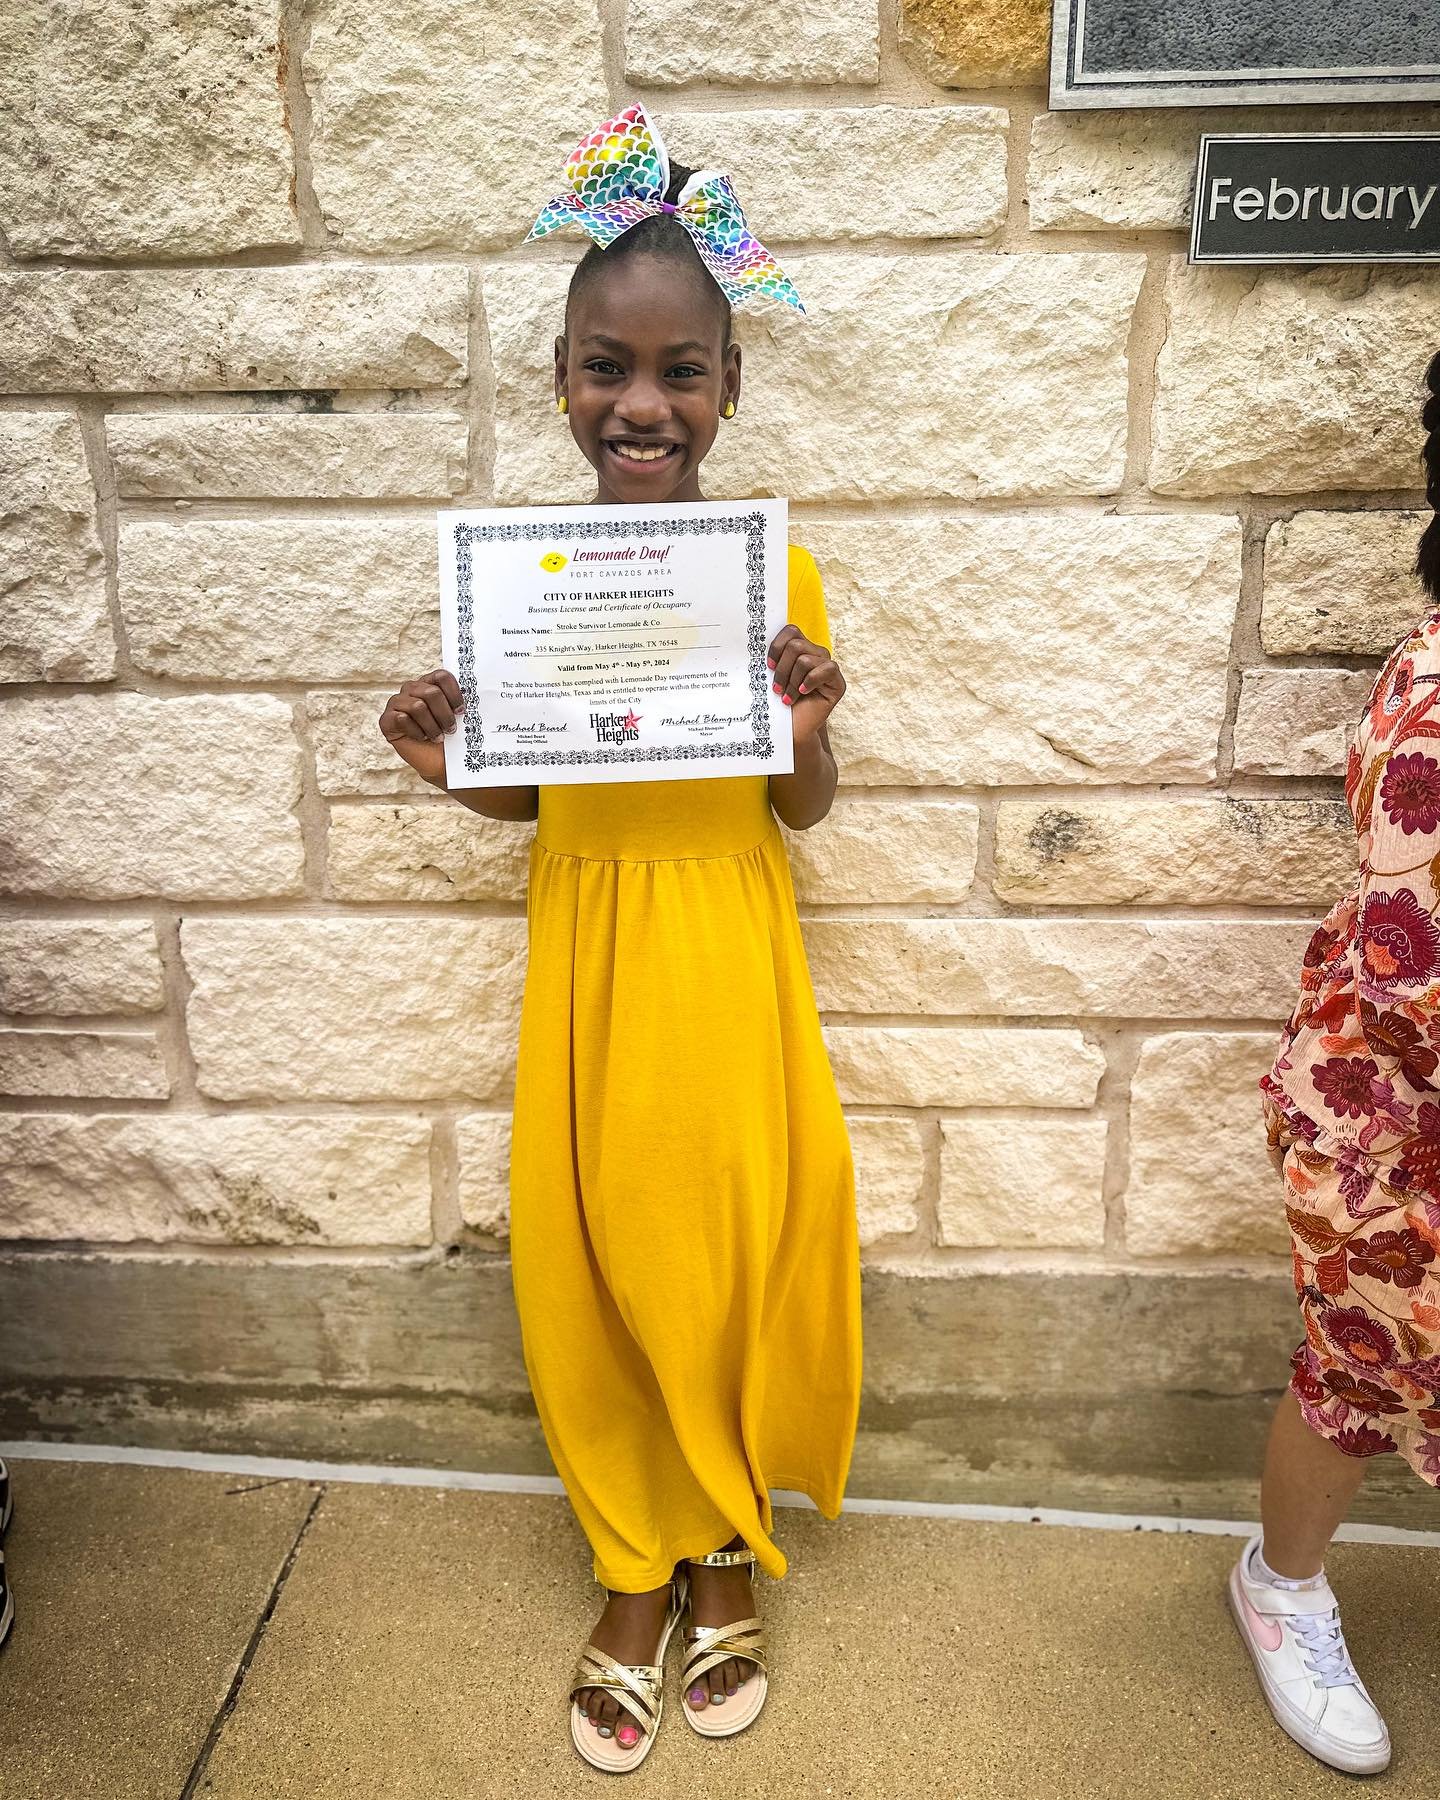 Thank you @harkerheightstx for issuing me &amp; my fellow entrepreneurs an official business license to operate on Lemonade Day! 🍋🪪 
.
.
.
#youthentrepreneur #youthentrepreneurship #lemonadestand #lemonadeday #businesslicense